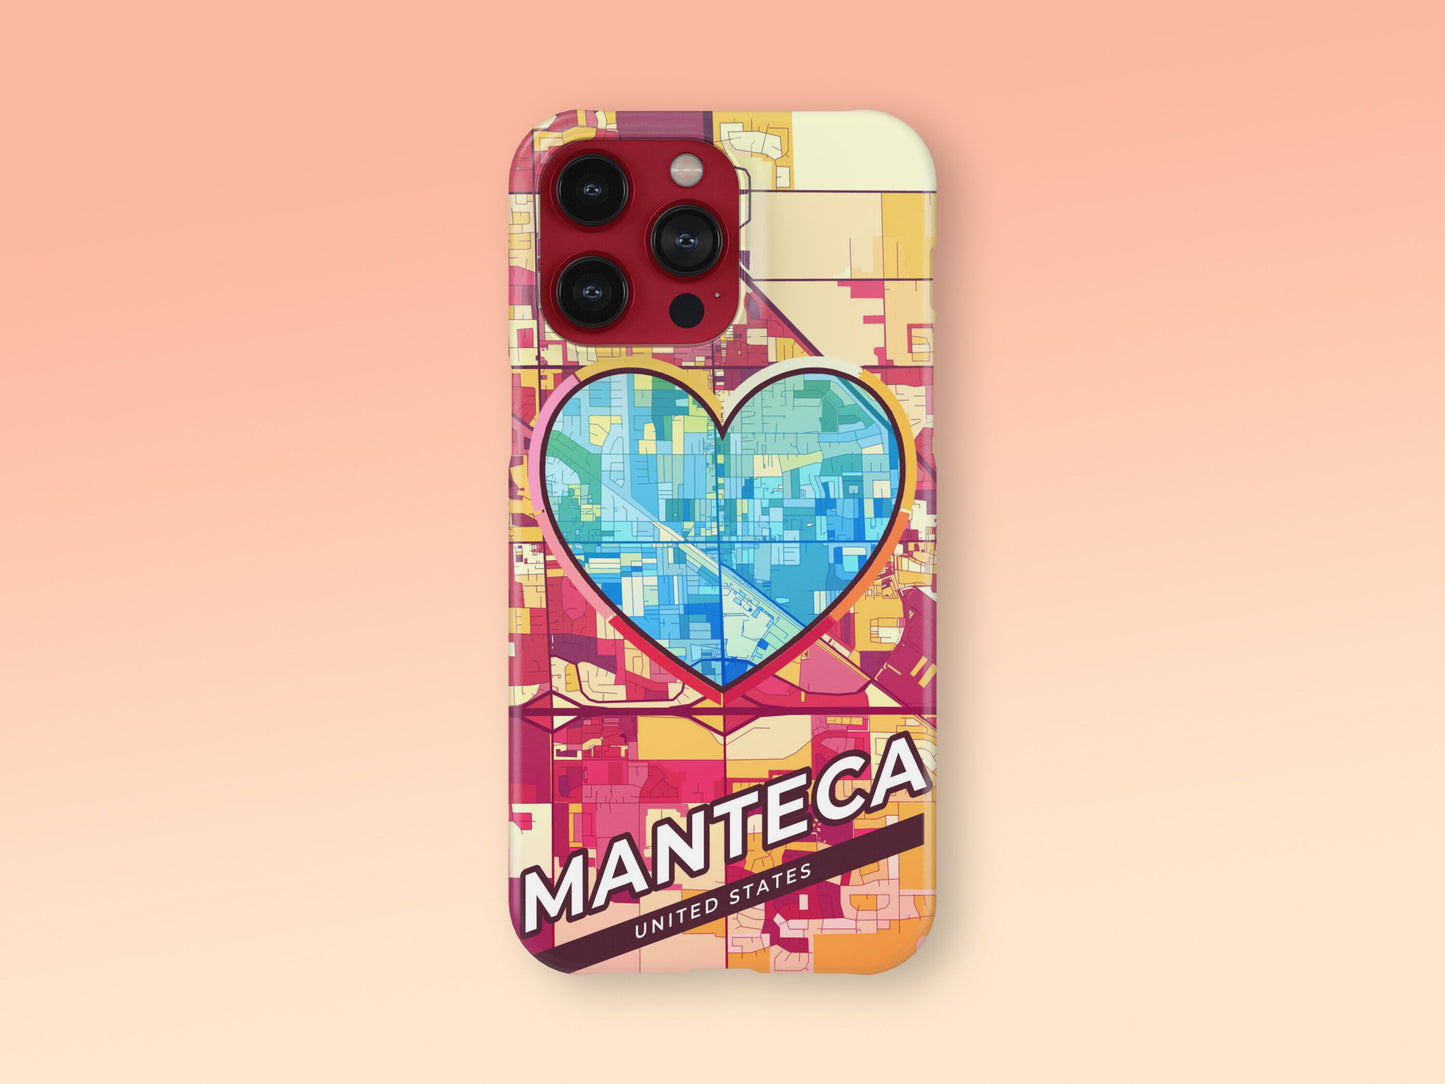 Manteca California slim phone case with colorful icon. Birthday, wedding or housewarming gift. Couple match cases. 2